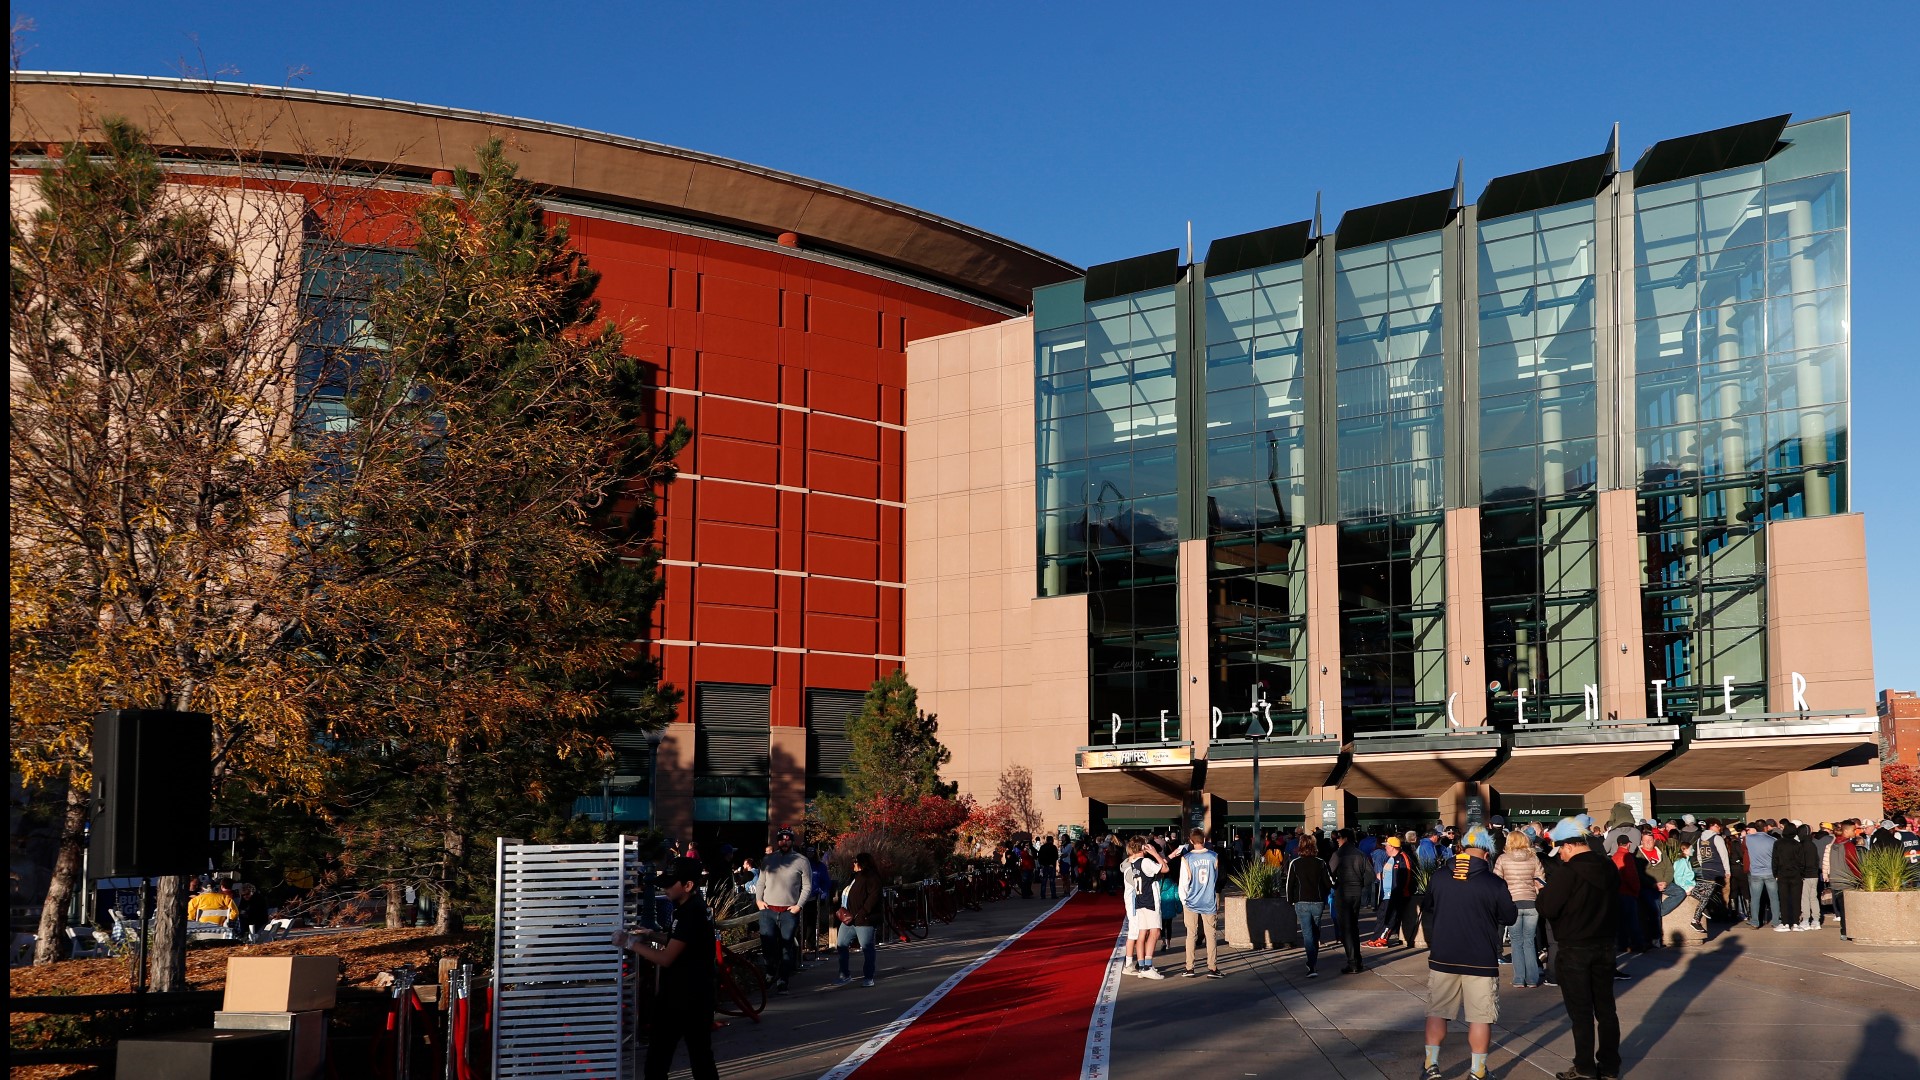 Pepsi Center is home to the Denver Nuggets, Colorado Avalanche and Colorado Mammoth. The venue opened on Oct. 1, 1999 in downtown Denver.